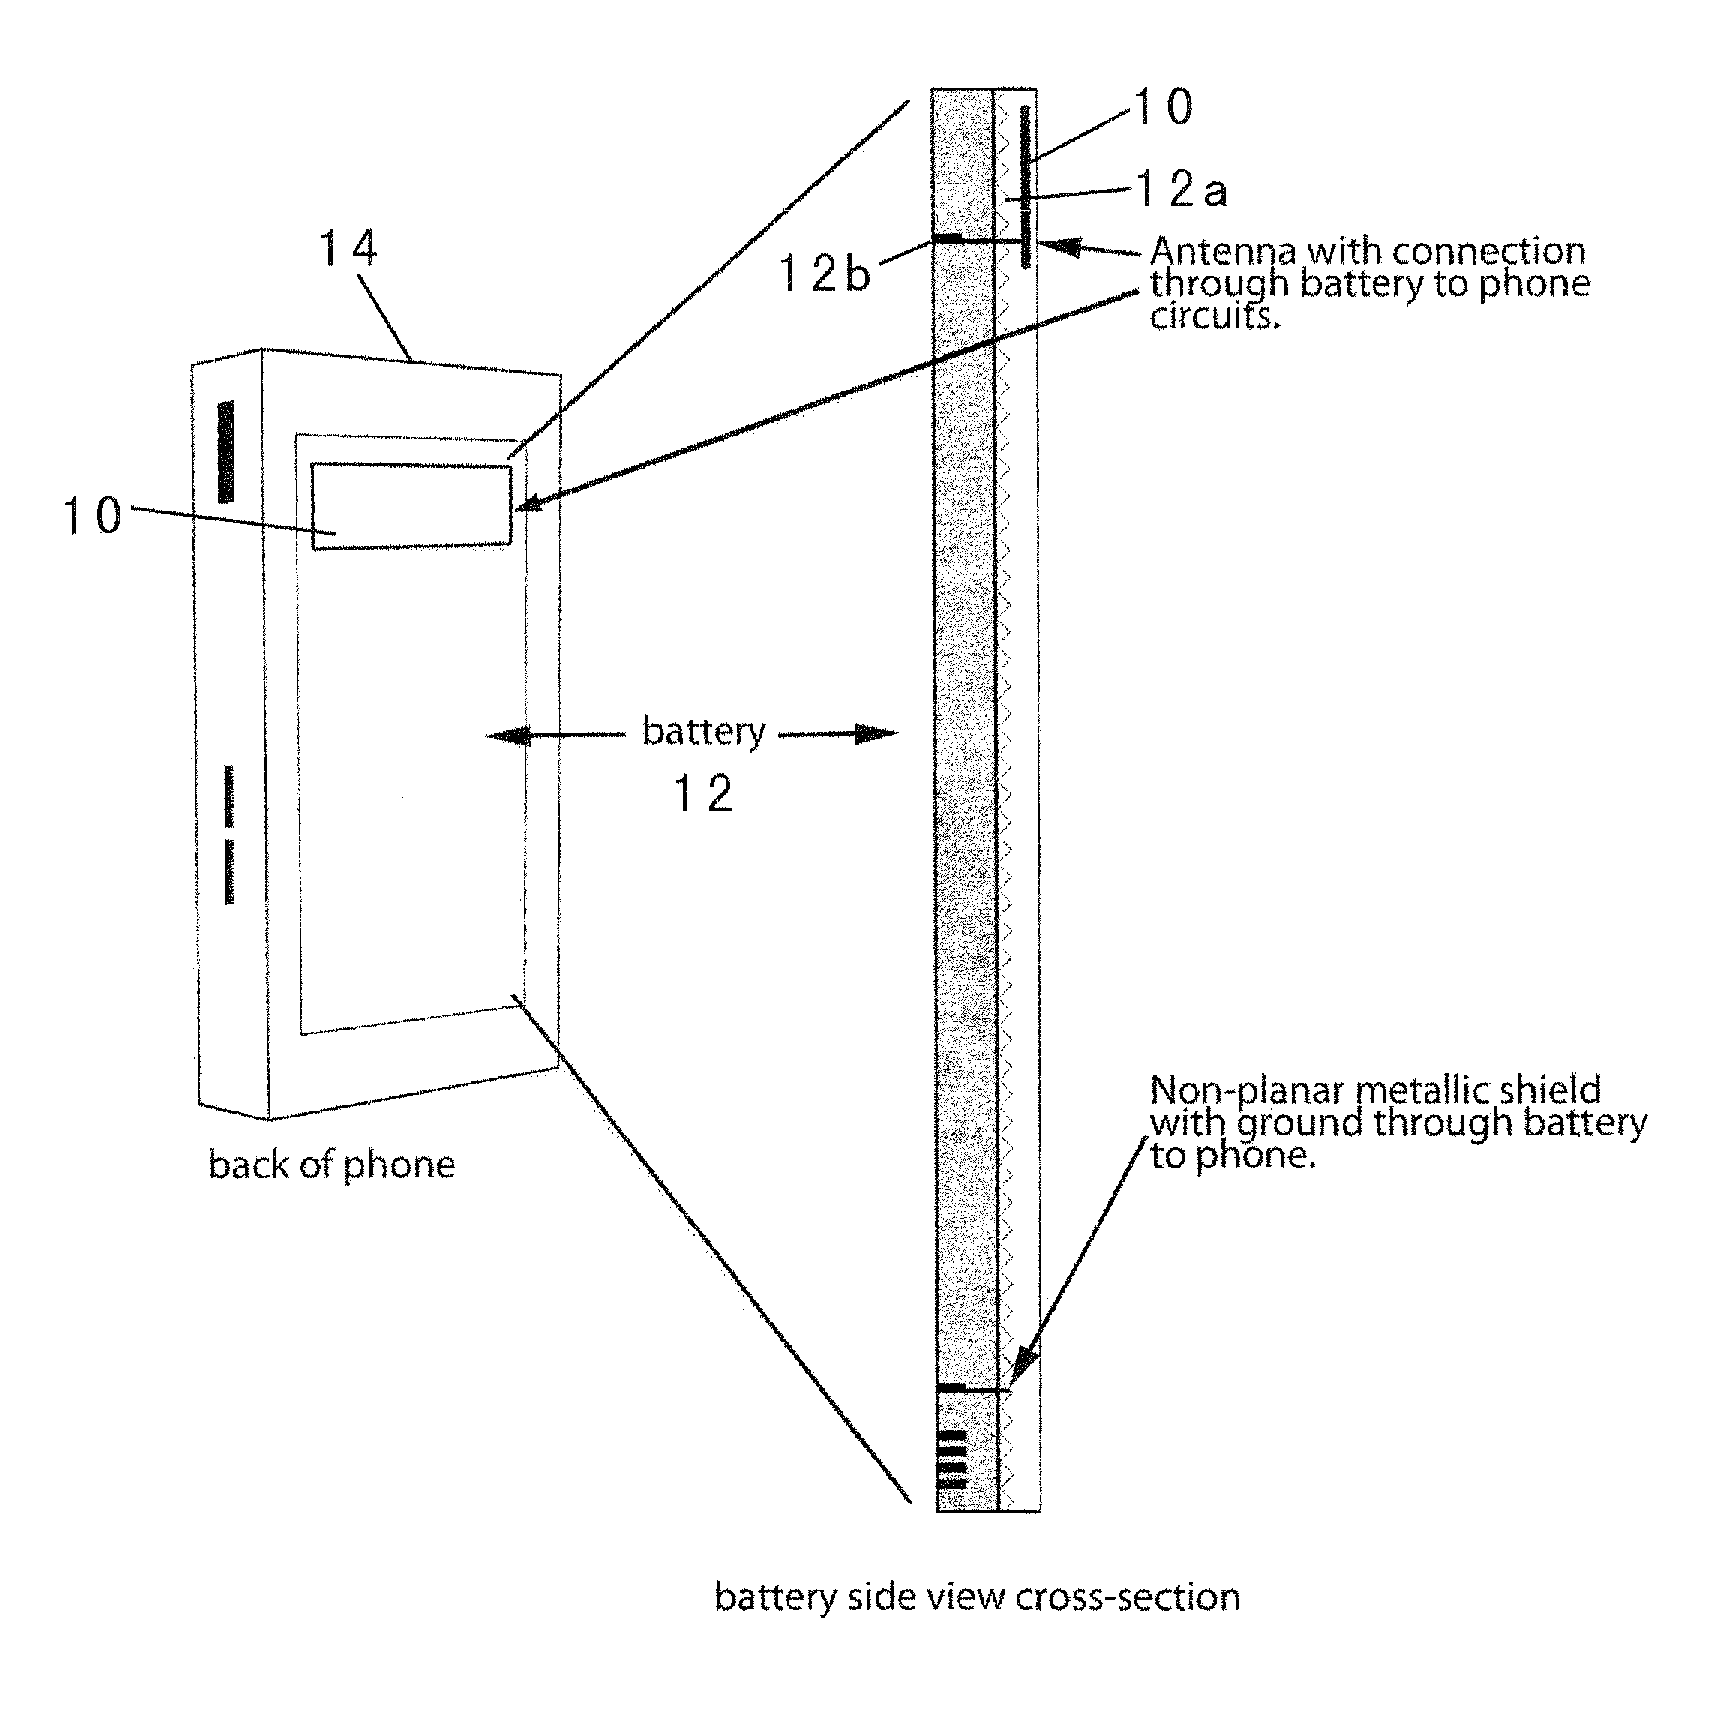 Radiation redirecting external case for portable communication device and antenna embedded in battery of portable communication device